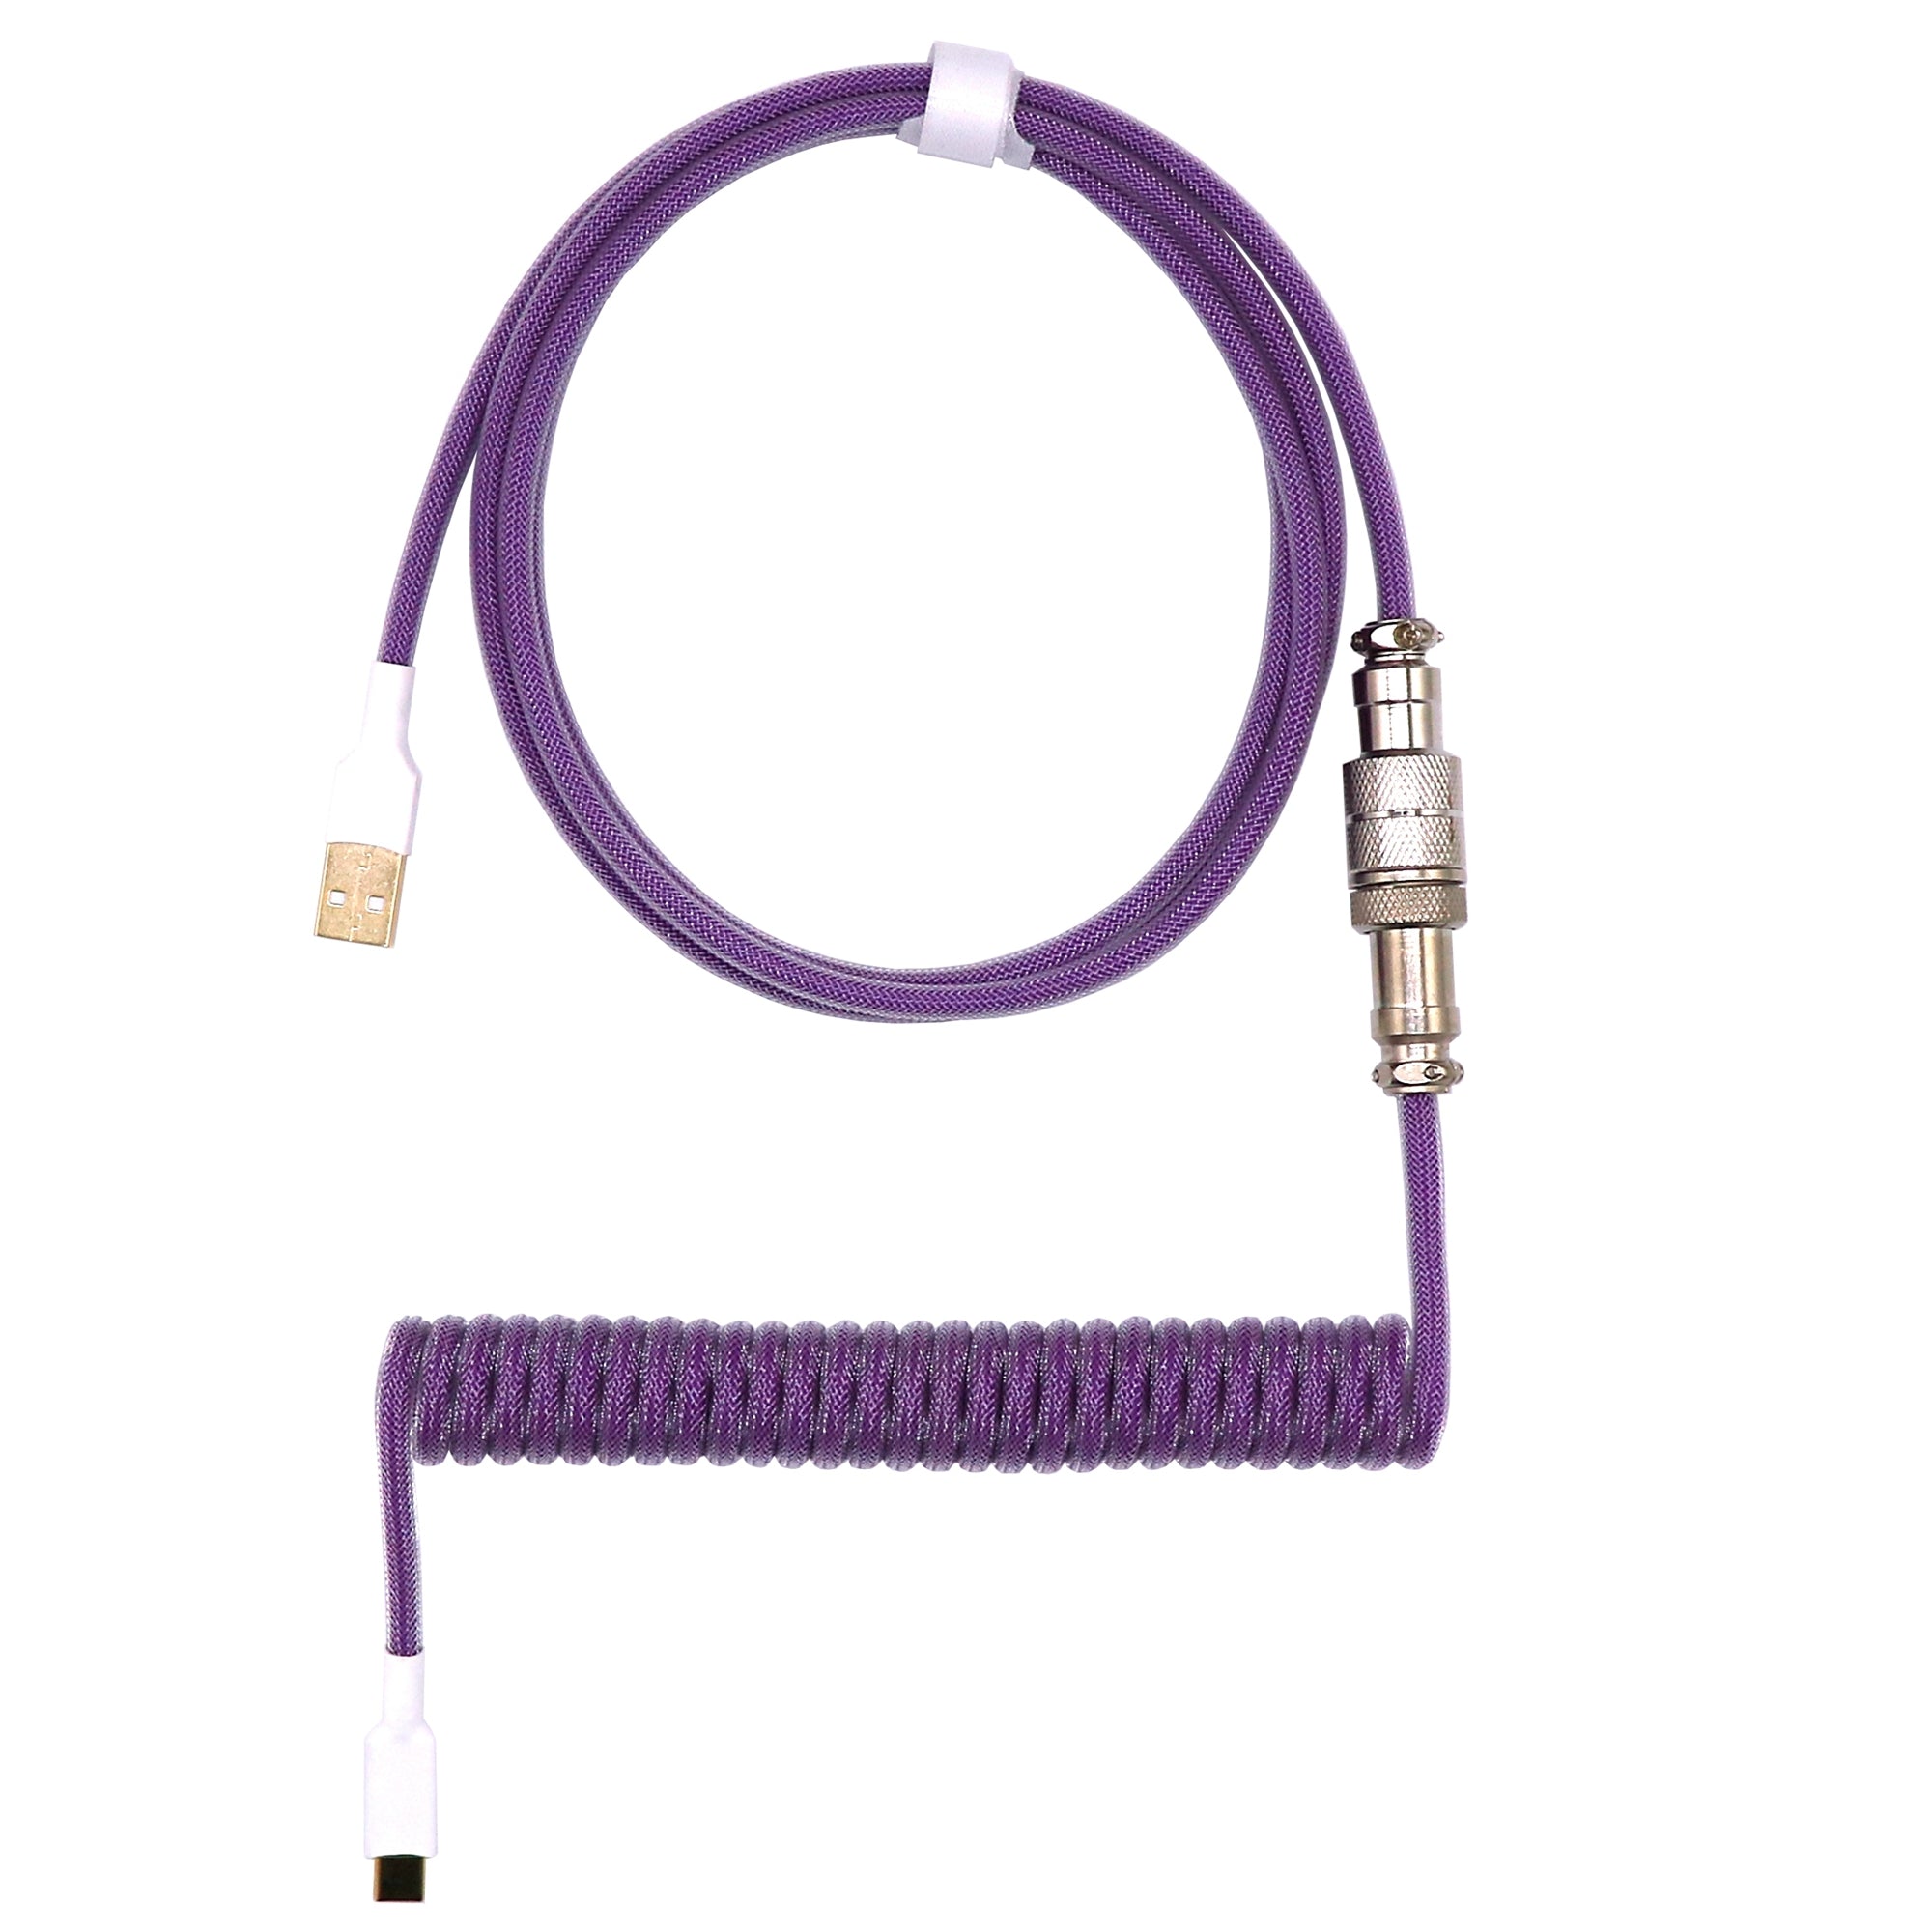 Coiled Keyboard Cable - PURPLE